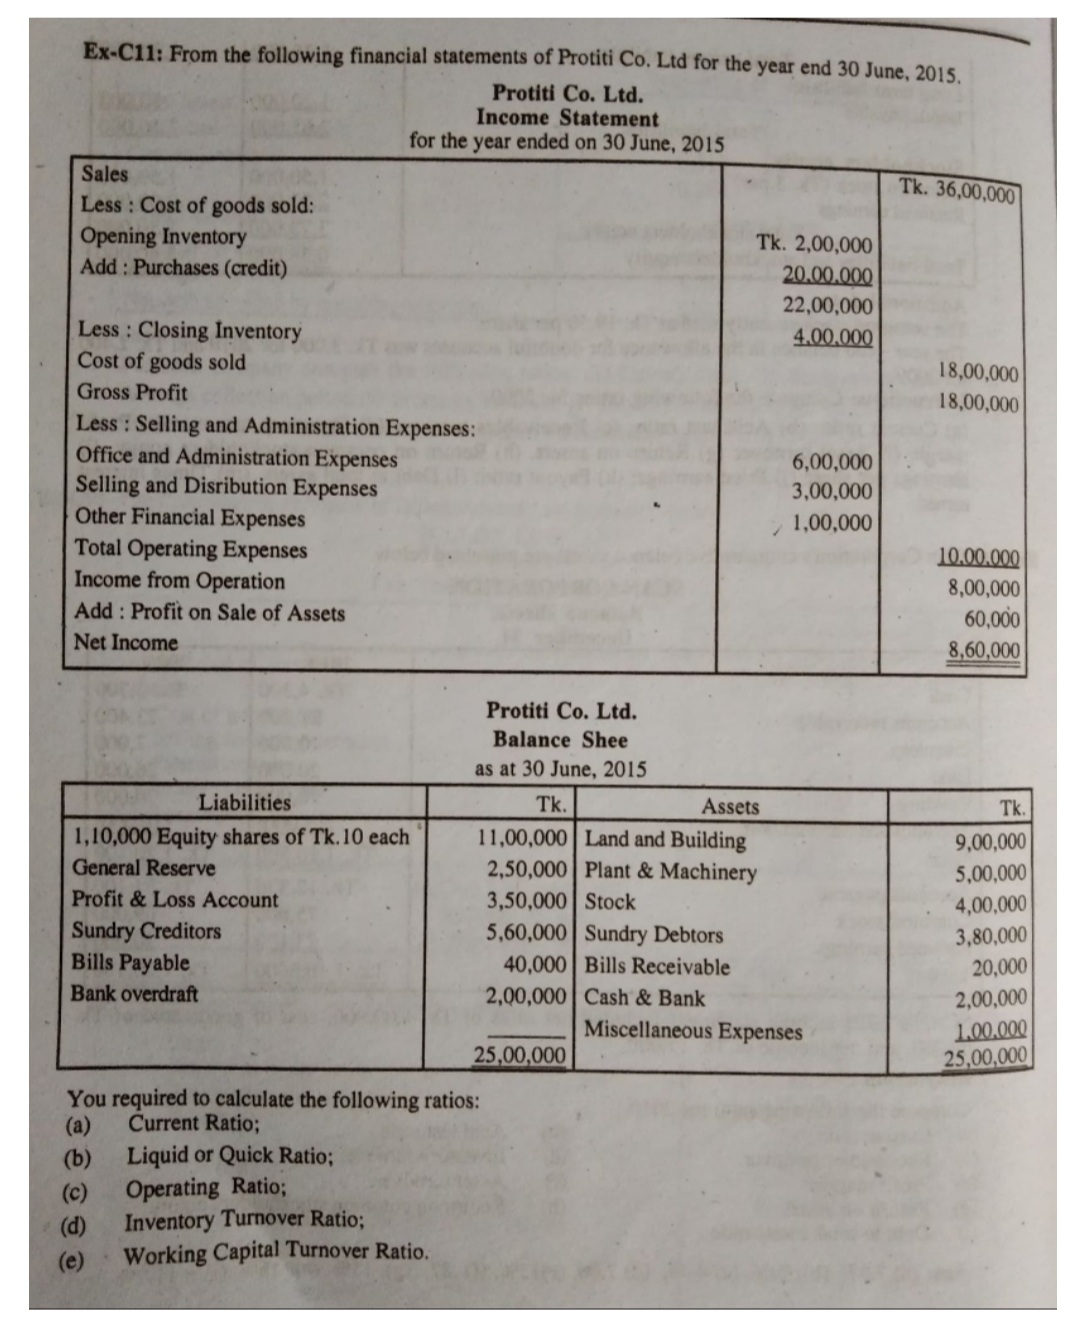 Ex-C11: From the following financial statements of Protiti Co. Ltd for the year end 30 June, 2015.
Protiti Co. Ltd.
Income Statement
for the year ended on 30 June, 2015
Sales
Tk. 36,00,000
Less : Cost of goods sold:
Opening Inventory
Add: Purchases (credit)
Tk. 2,00,000
20.00.000
22,00,000
Less : Closing Inventory
Cost of goods sold
4.00,000
18,00,000
Gross Profit
18,00,000
Less : Selling and Administration Expenses:
Office and Administration Expenses
Selling and Disribution Expenses
Other Financial Expenses
Total Operating Expenses
Income from Operation
Add : Profit on Sale of Assets
6,00,000
3,00,000
1,00,000
10.00.000
8,00,000
60,000
8,60,000
Net Income
Protiti Co. Ltd.
Balance Shee
as at 30 June, 2015
Liabilities
Tk.
Assets
Tk.
1,10,000 Equity shares of Tk.10 each
11,00,000 Land and Building
2,50,000 Plant & Machinery
3,50,000 Stock
5,60,000 Sundry Debtors
9,00,000
General Reserve
5,00,000
Profit & Loss Account
4,00,000
3,80,000
Sundry Creditors
Bills Payable
40,000 Bills Receivable
20,000
Bank overdraft
2,00,000 Cash & Bank
2,00,000
Miscellaneous Expenses
1.00.000
25,00,000
25,00,000
You required to calculate the following ratios:
Current Ratio;
(а)
(b) Liquid or Quick Ratio;
(c) Operating Ratio;
Inventory Turnover Ratio%;
(d)
Working Capital Turnover Ratio.
(e)
